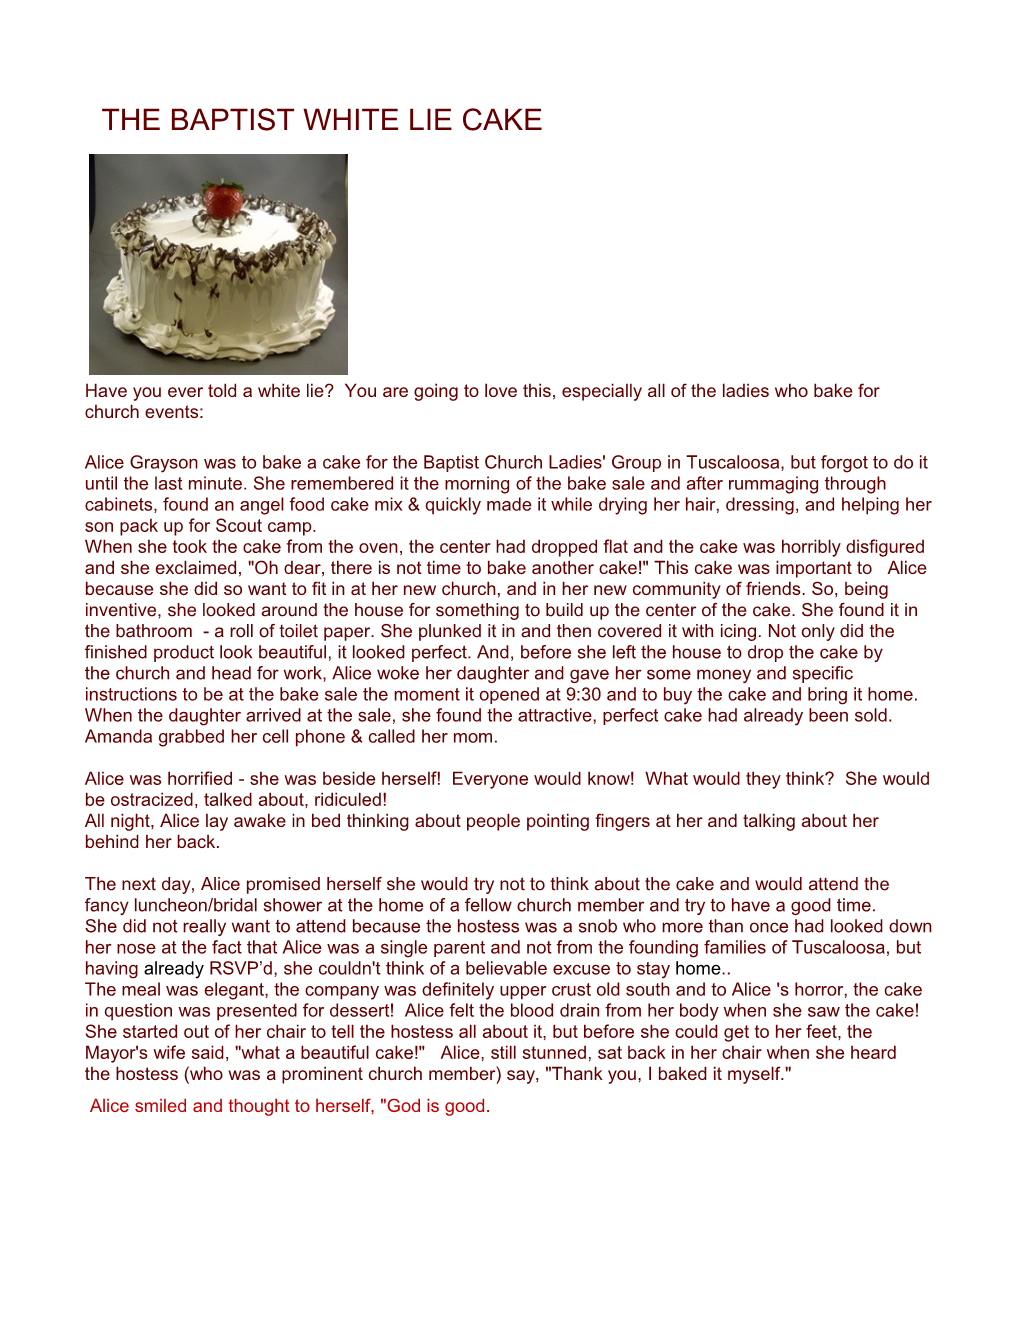 THE BAPTIST WHITE LIE CAKE Have You Ever Told a White Lie? You Are Going to Love This,Especially